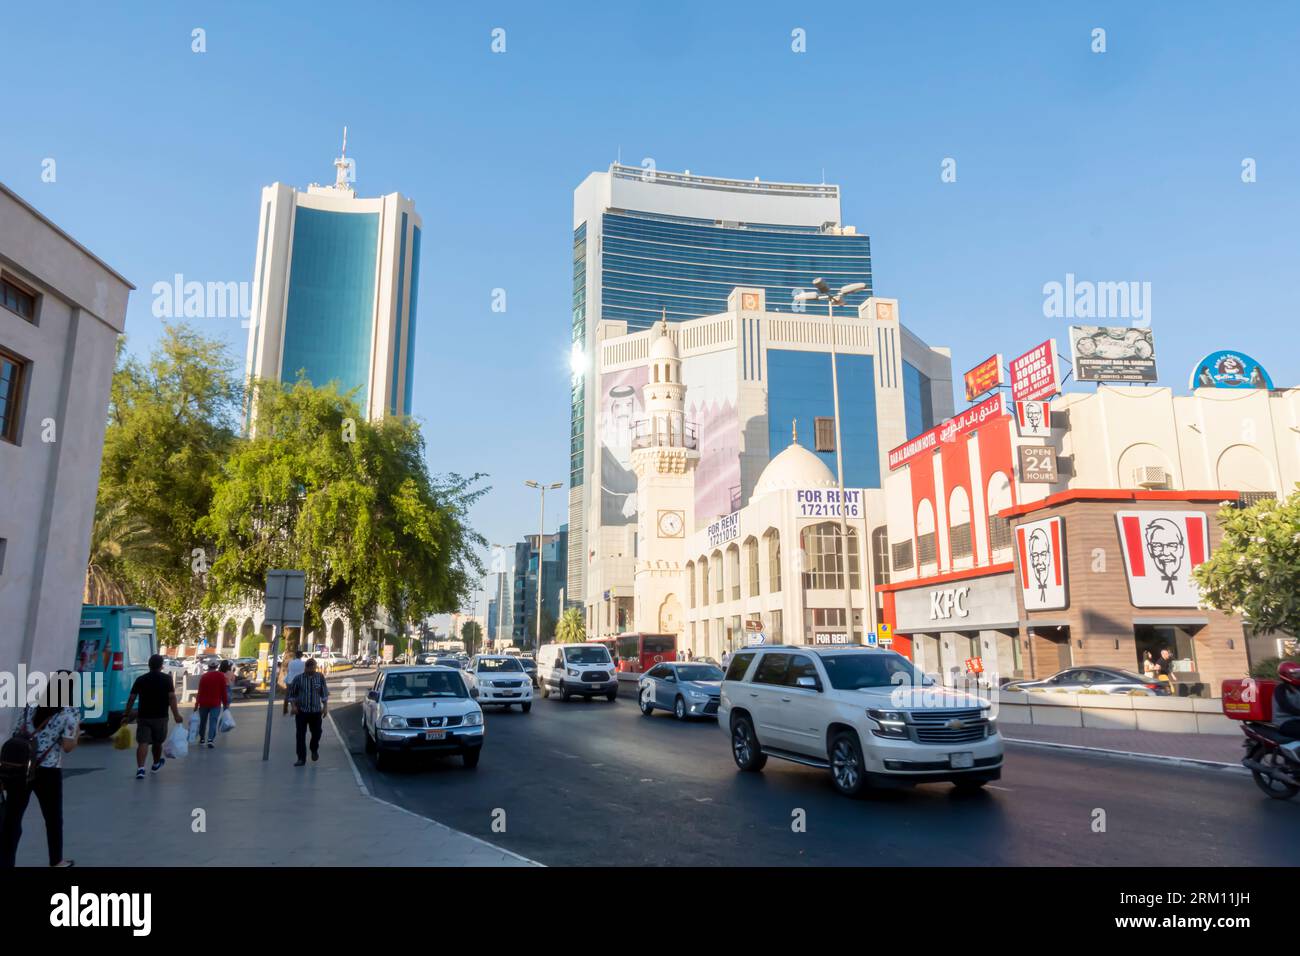 Government avenue central Manama Bahrain. Financial institutions, business district Stock Photo